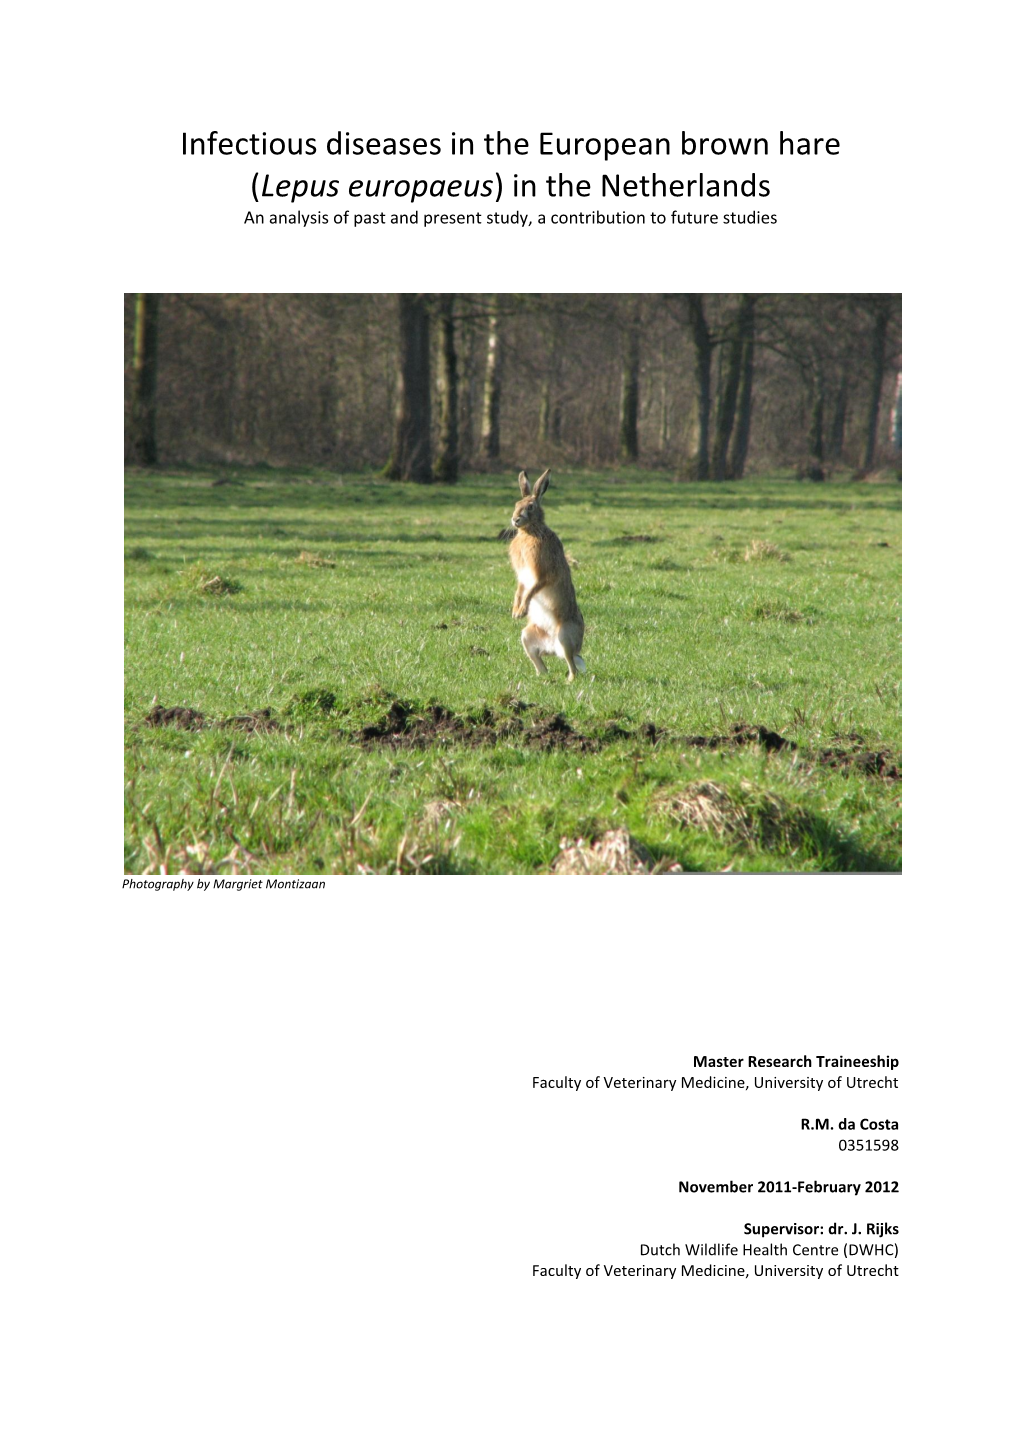 Infectious Diseases in the European Brown Hare (Lepus Europaeus) in the Netherlands an Analysis of Past and Present Study, a Contribution to Future Studies